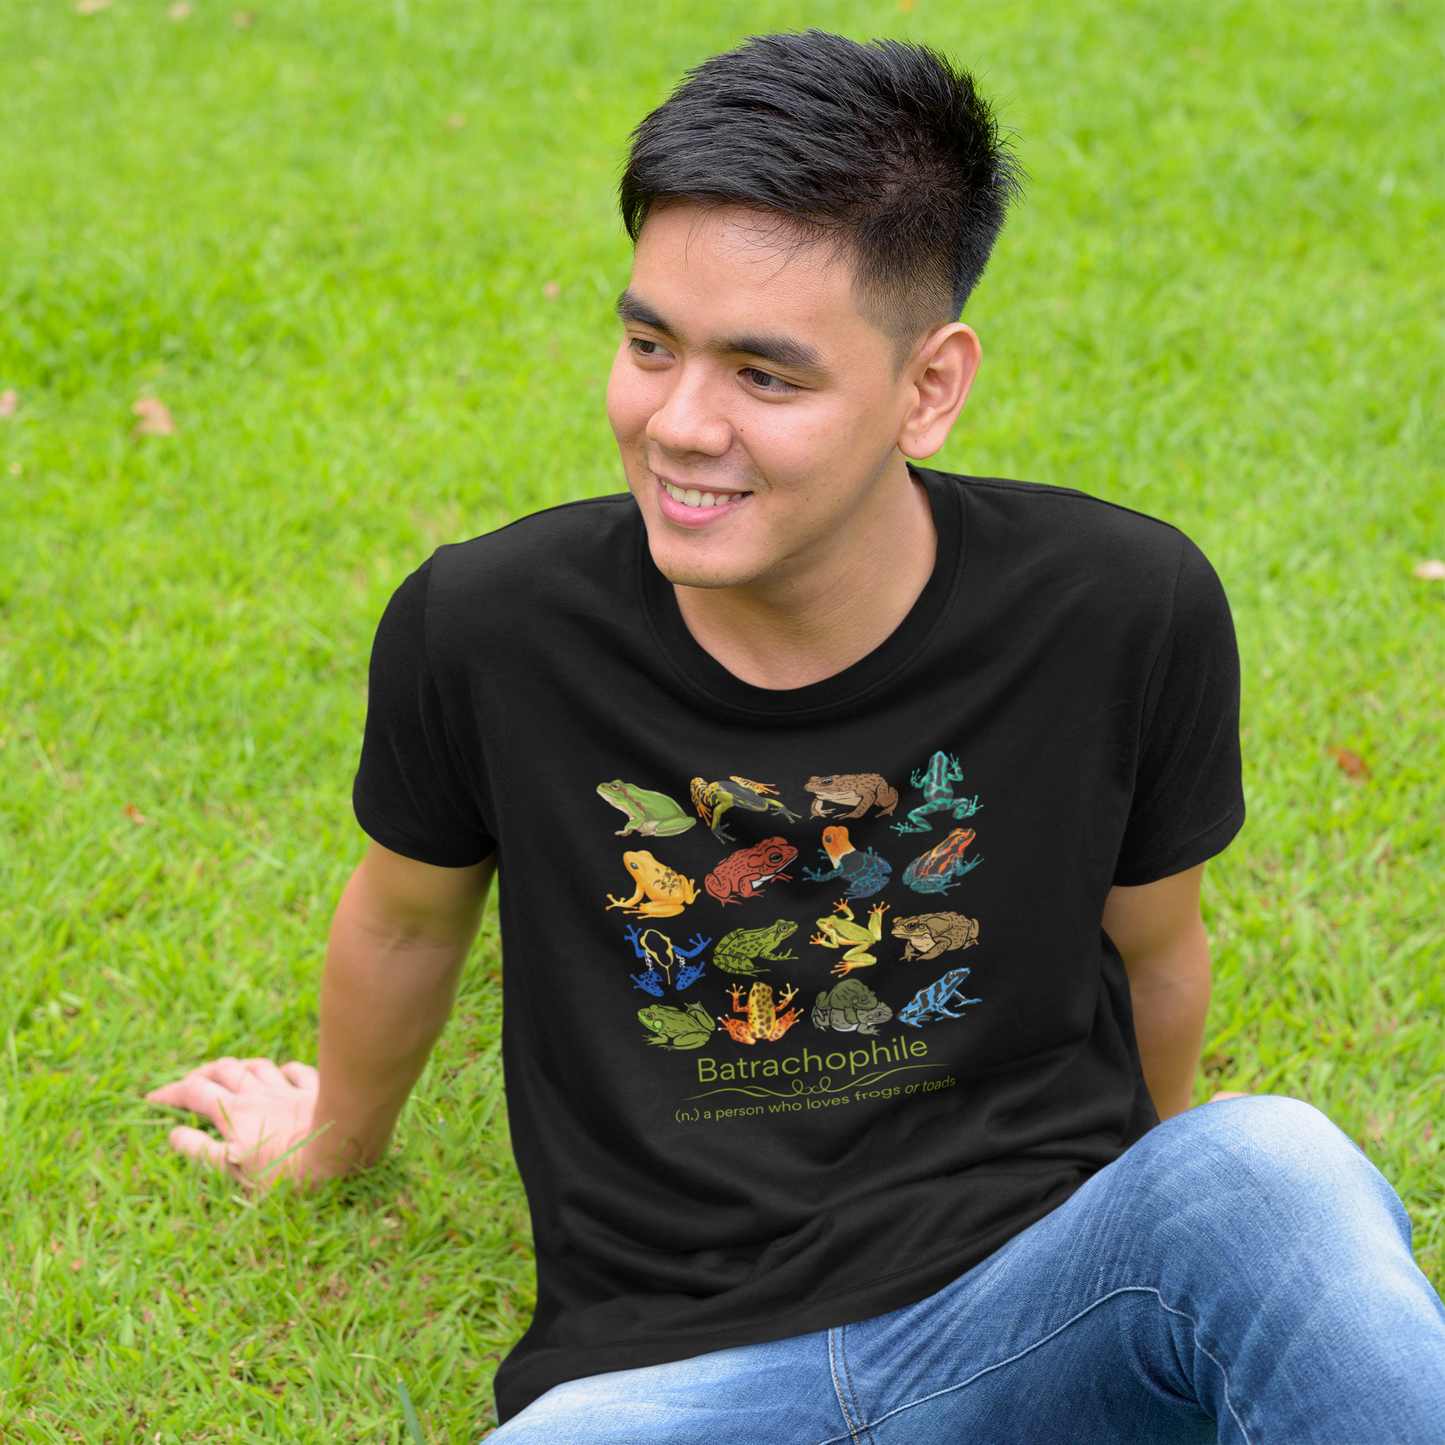 Young Asian man relaxing on the grass wearing jeans and a black t-shirt with 16 colorful frogs and toads in a 4x4 pattern; says Batrachophile - a person who loves frogs or toads below the frog images.